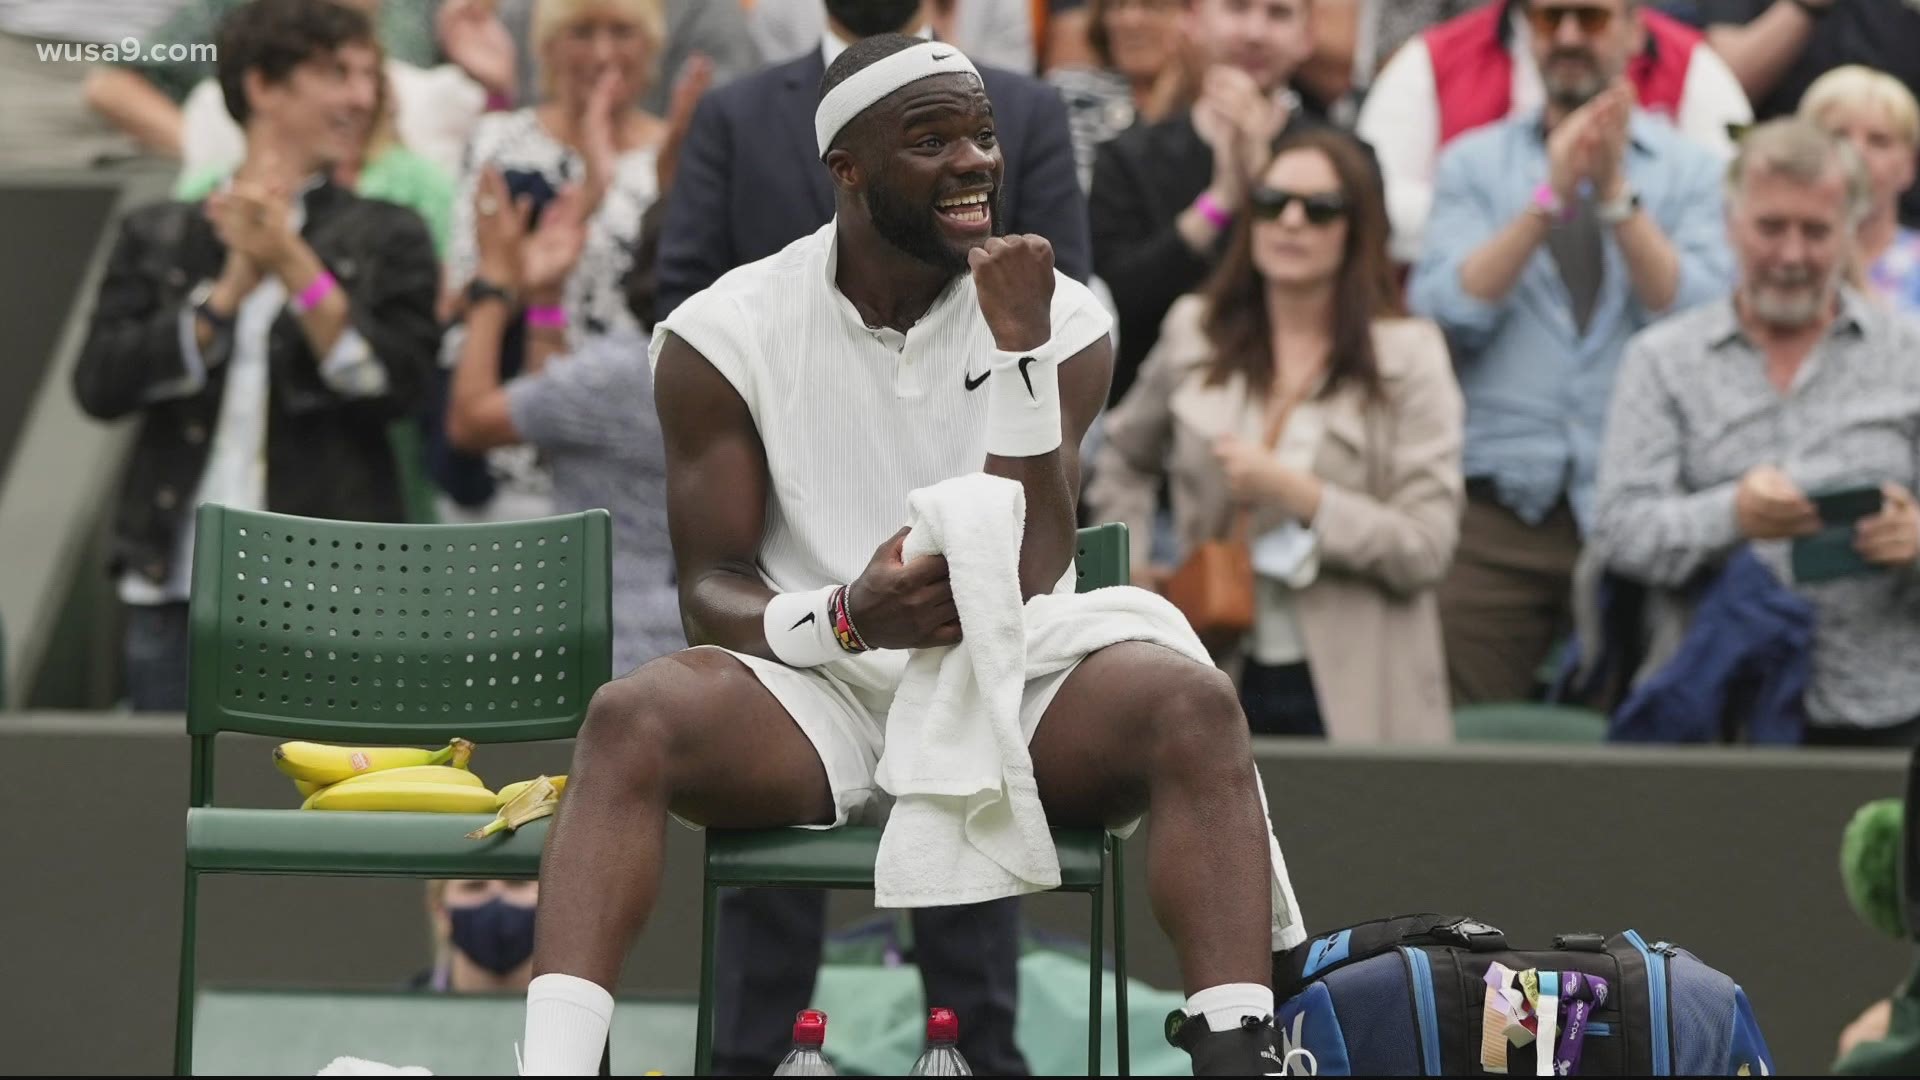 Frances Tiafoe is the first American man to defeat a top-3 seed at a major since Sam Querrey beat Andy Murray at Wimbledon in 2017.